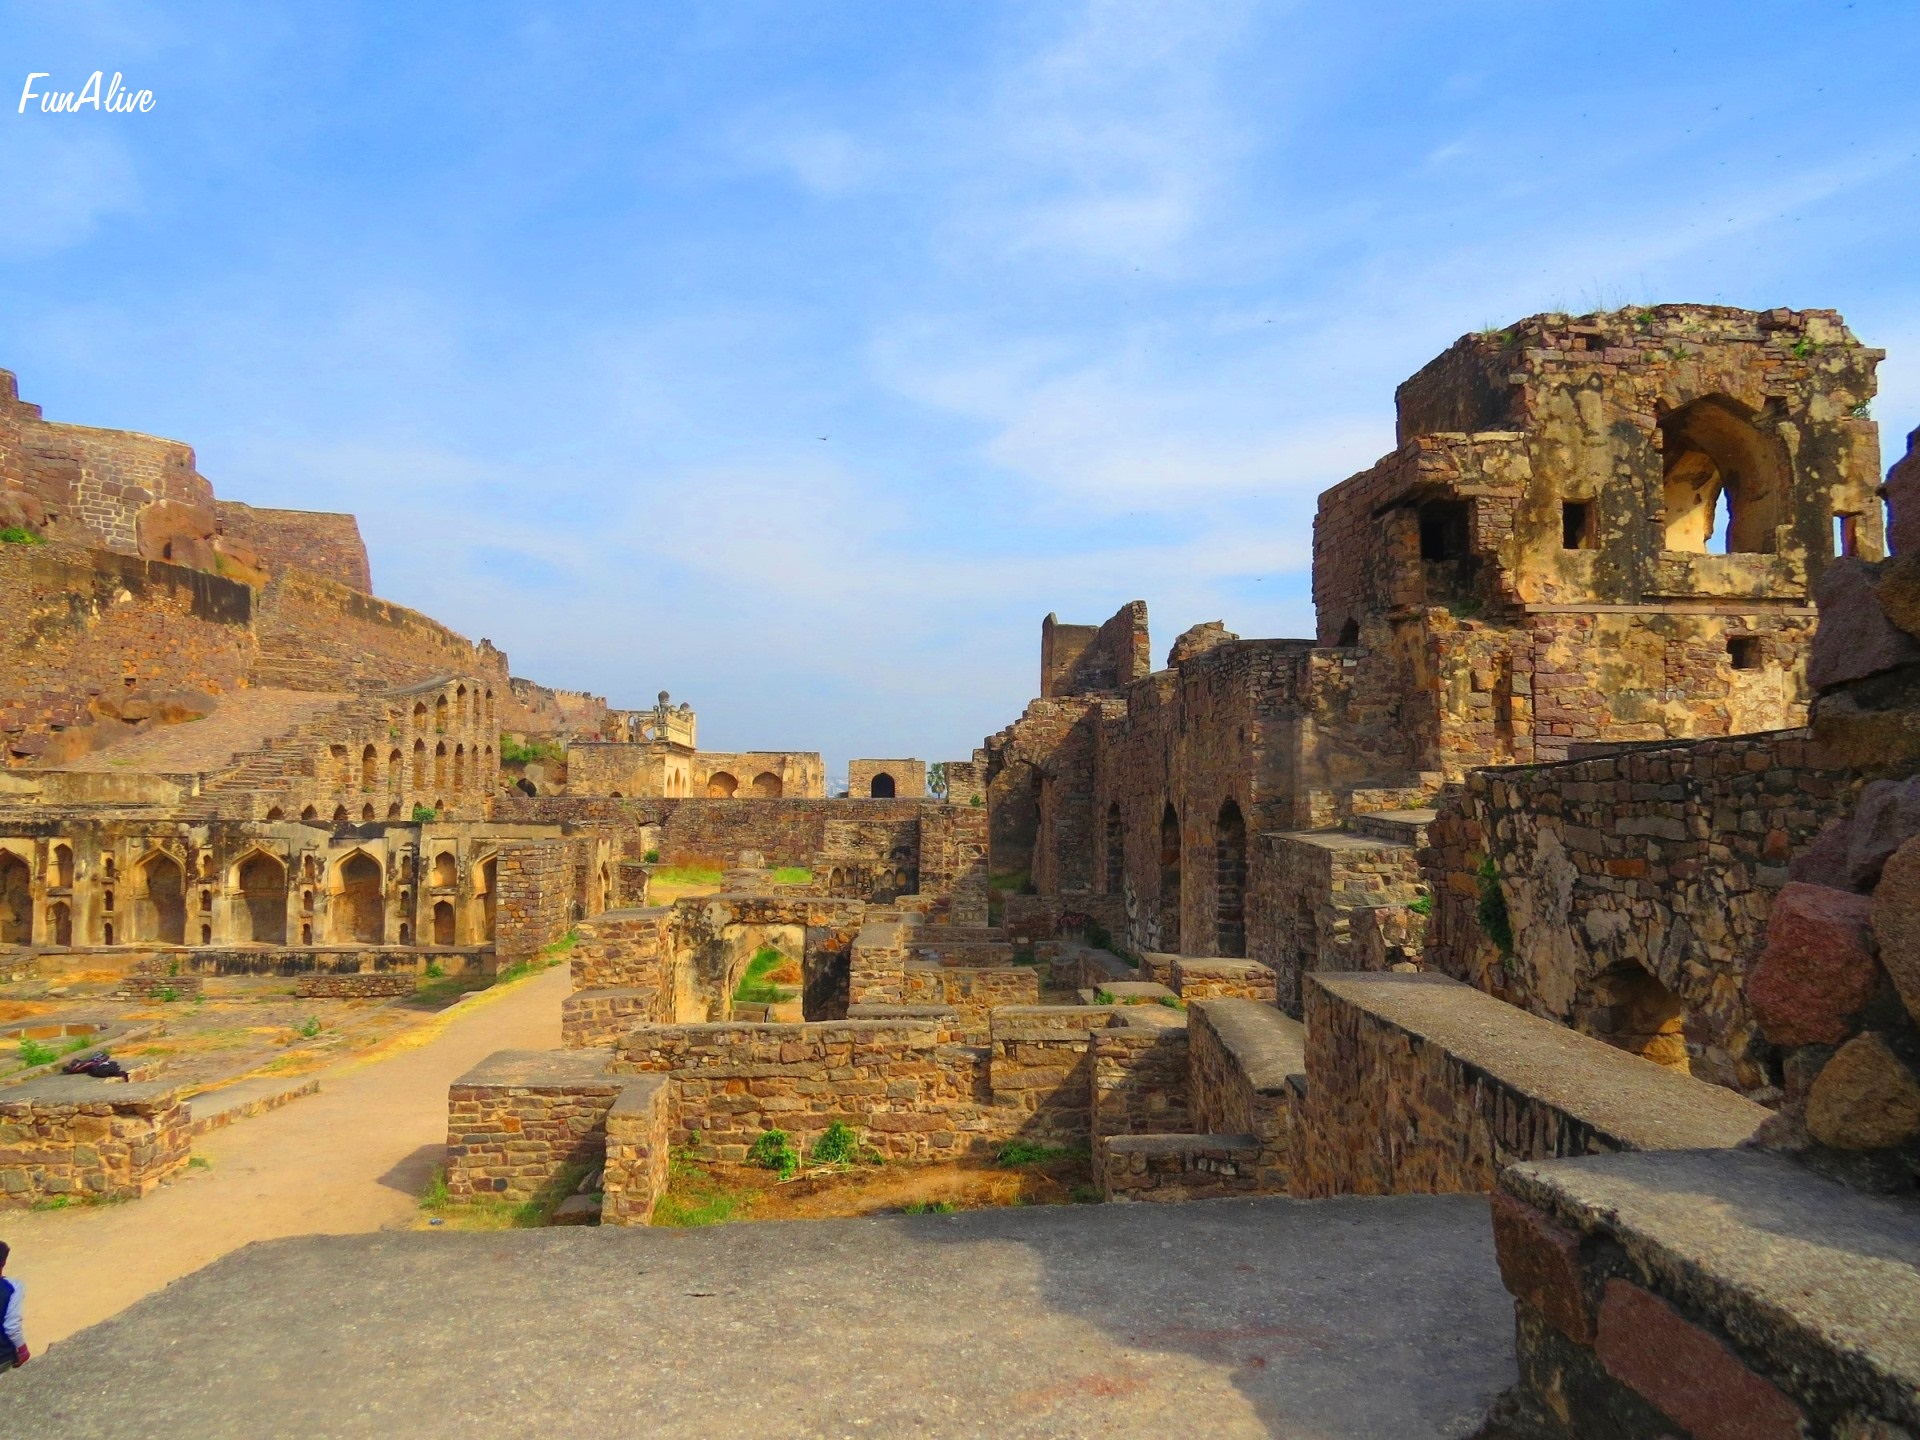 Golkonda Fort - The Majestic and Imposing Monument Of Hyderabad